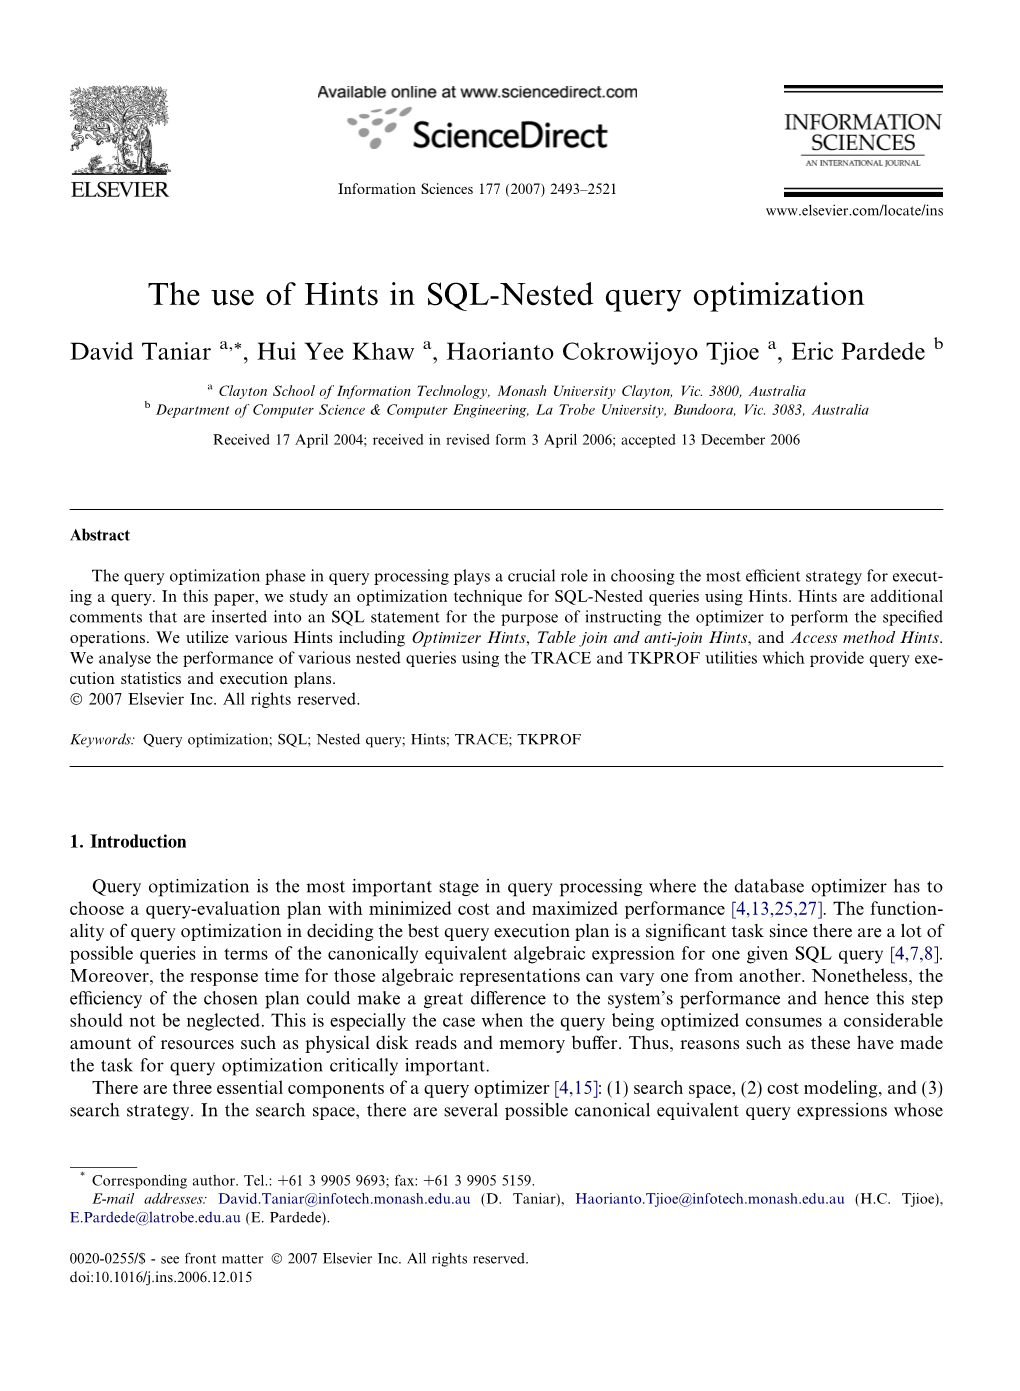 The Use of Hints in SQL-Nested Query Optimization